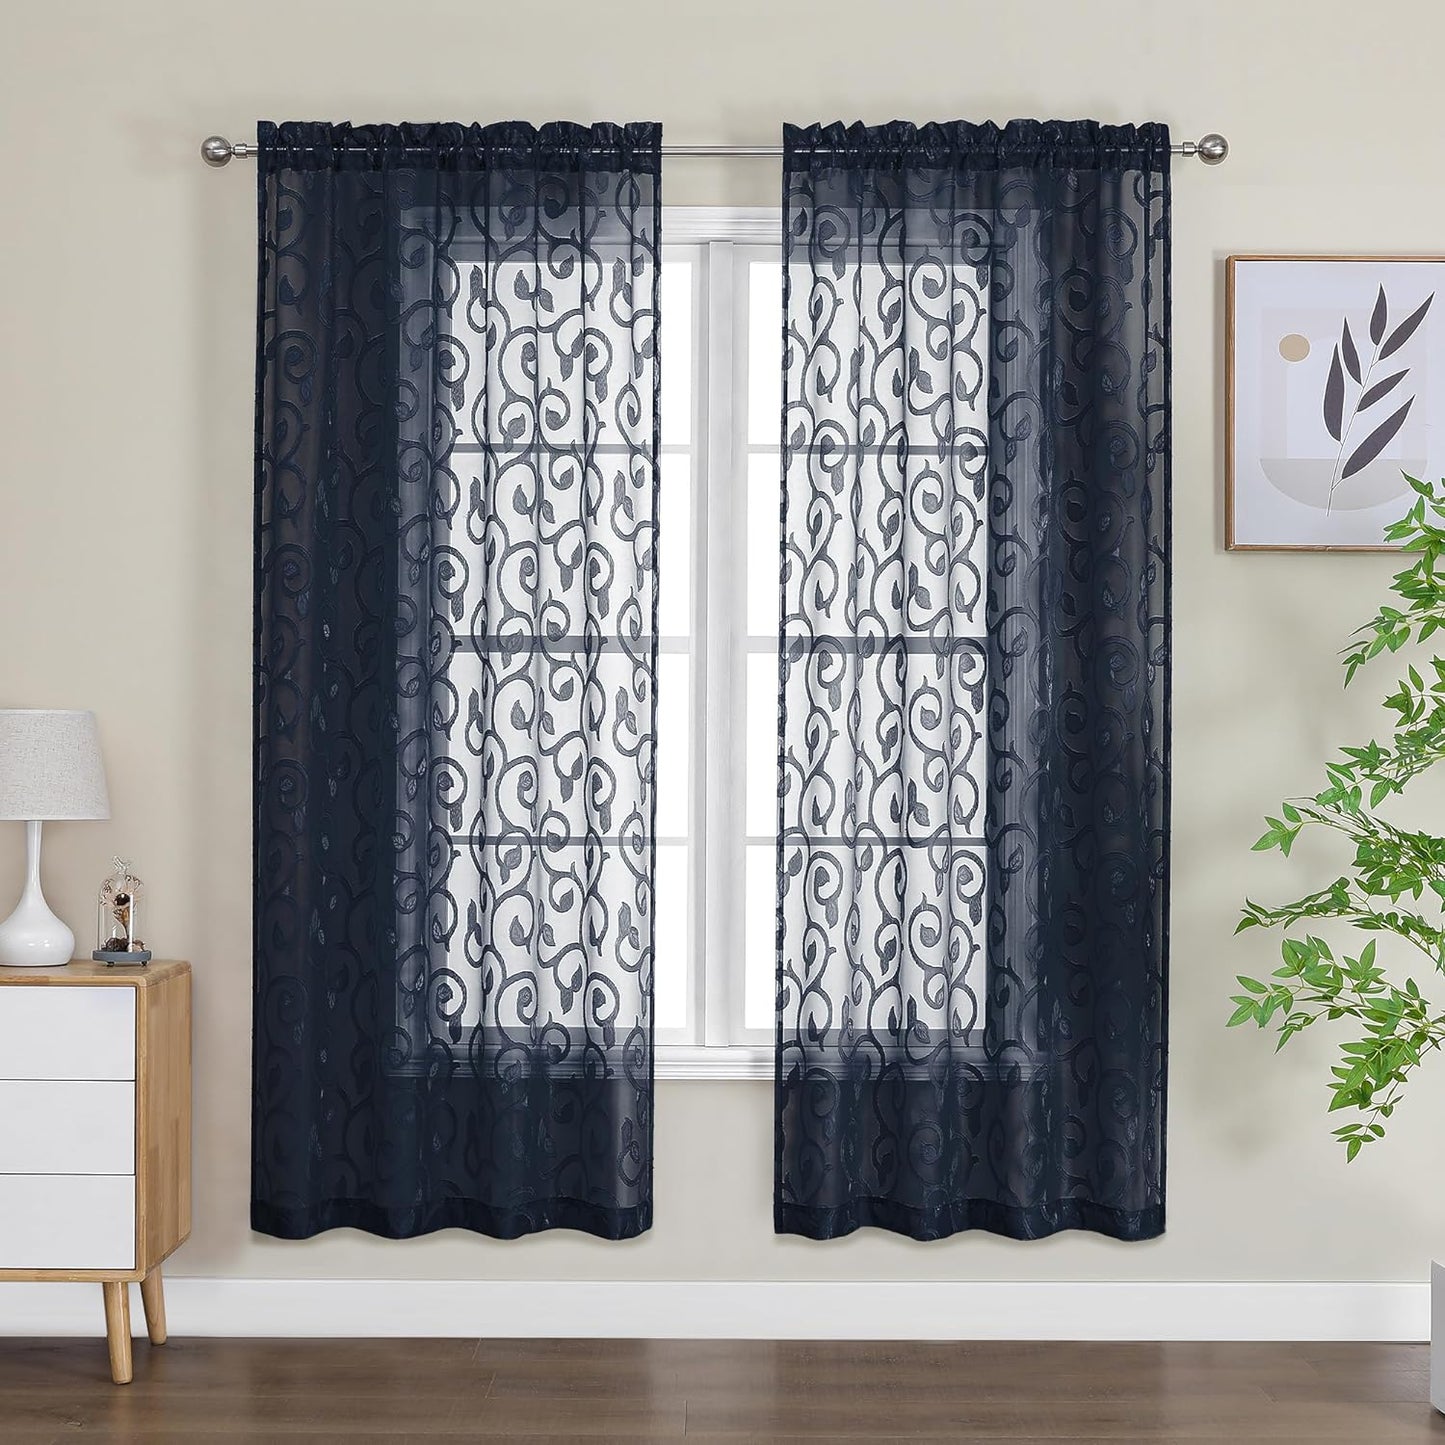 OWENIE Furman Sheer Curtains 84 Inches Long for Bedroom Living Room 2 Panels Set, Light Filtering Window Curtains, Semi Transparent Voile Top Dual Rod Pocket, Grey, 40Wx84L Inch, Total 84 Inches Width  OWENIE Navy Blue 40W X 63L 